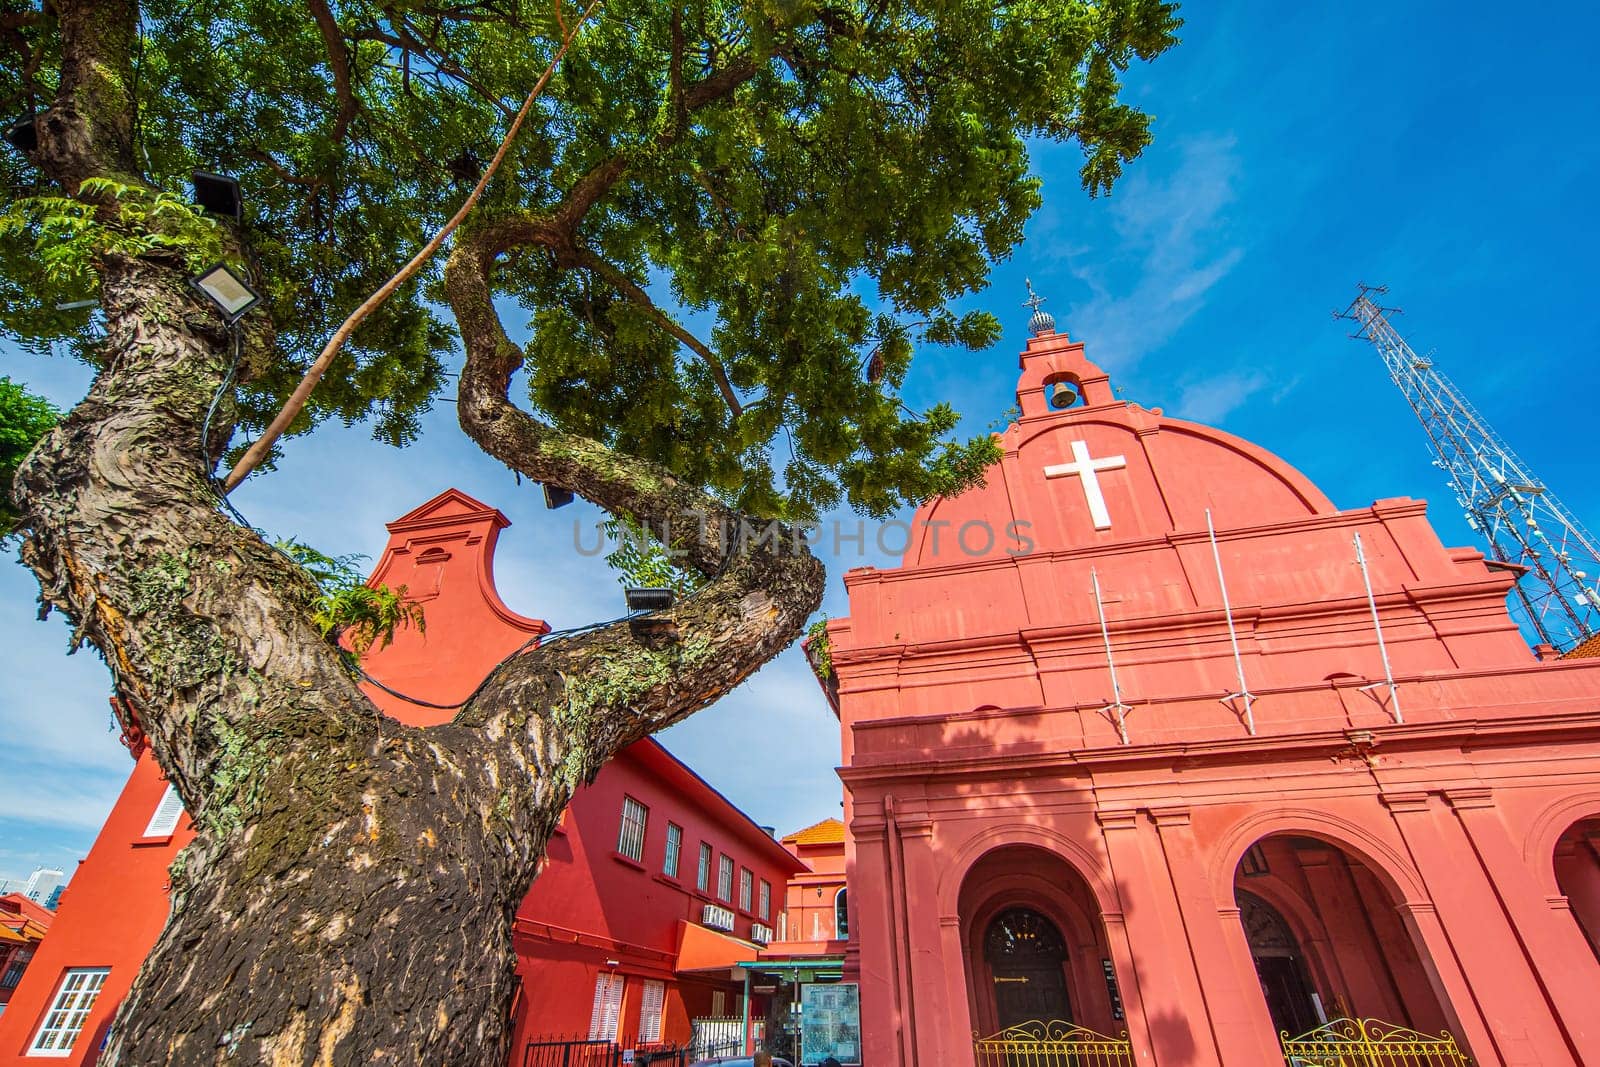 The oriental red building in Dutch Square, Melaka, Malacca, Malaysia